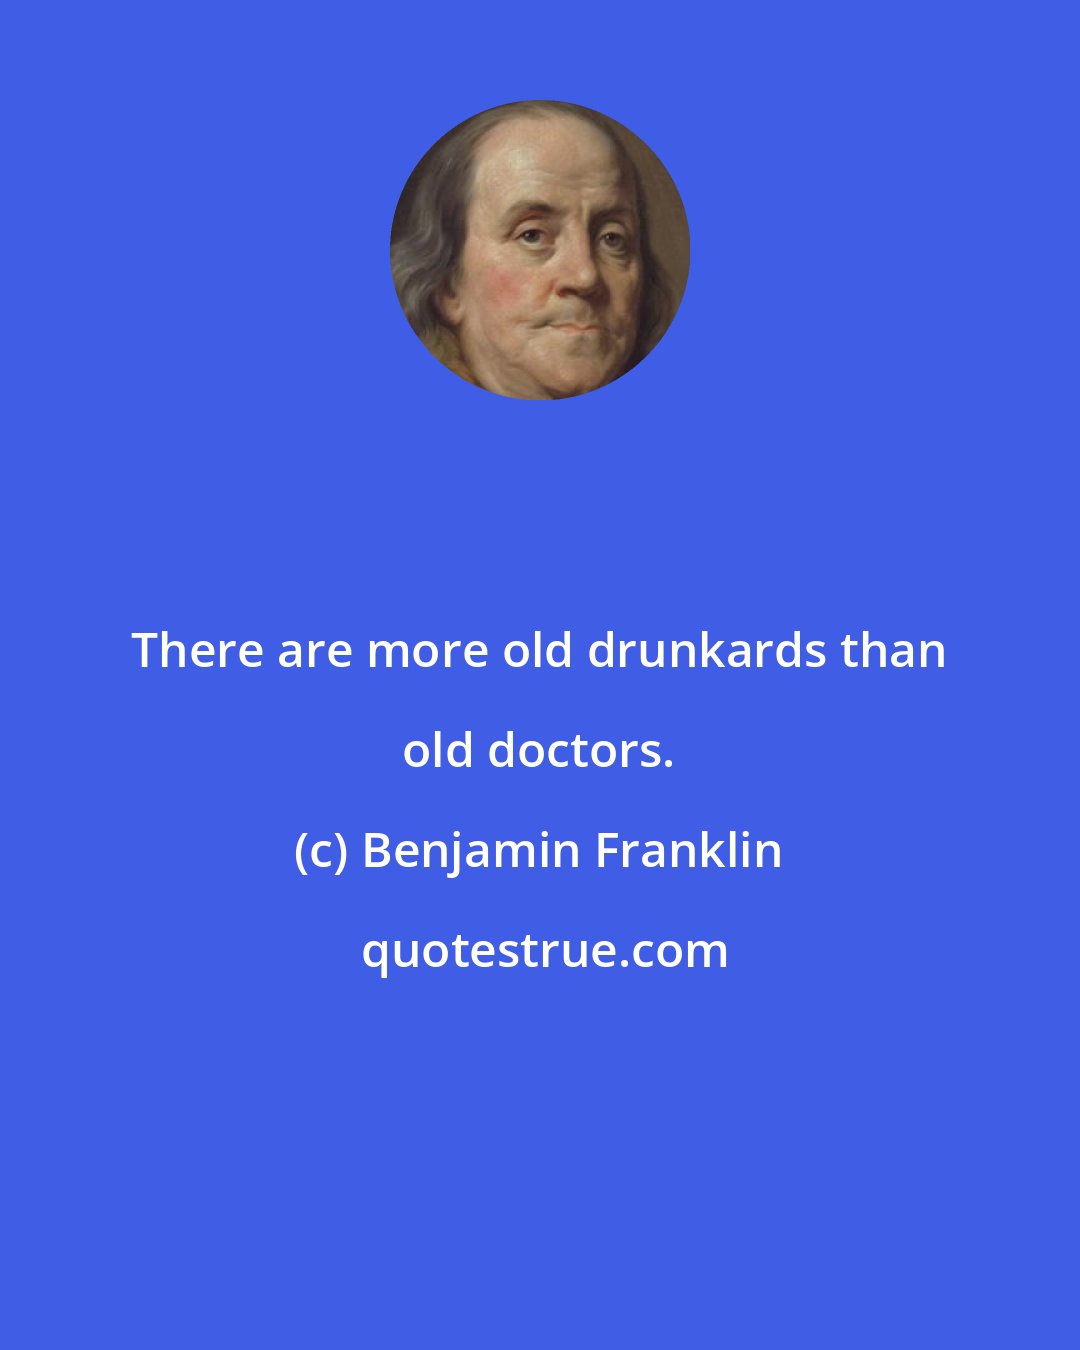 Benjamin Franklin: There are more old drunkards than old doctors.